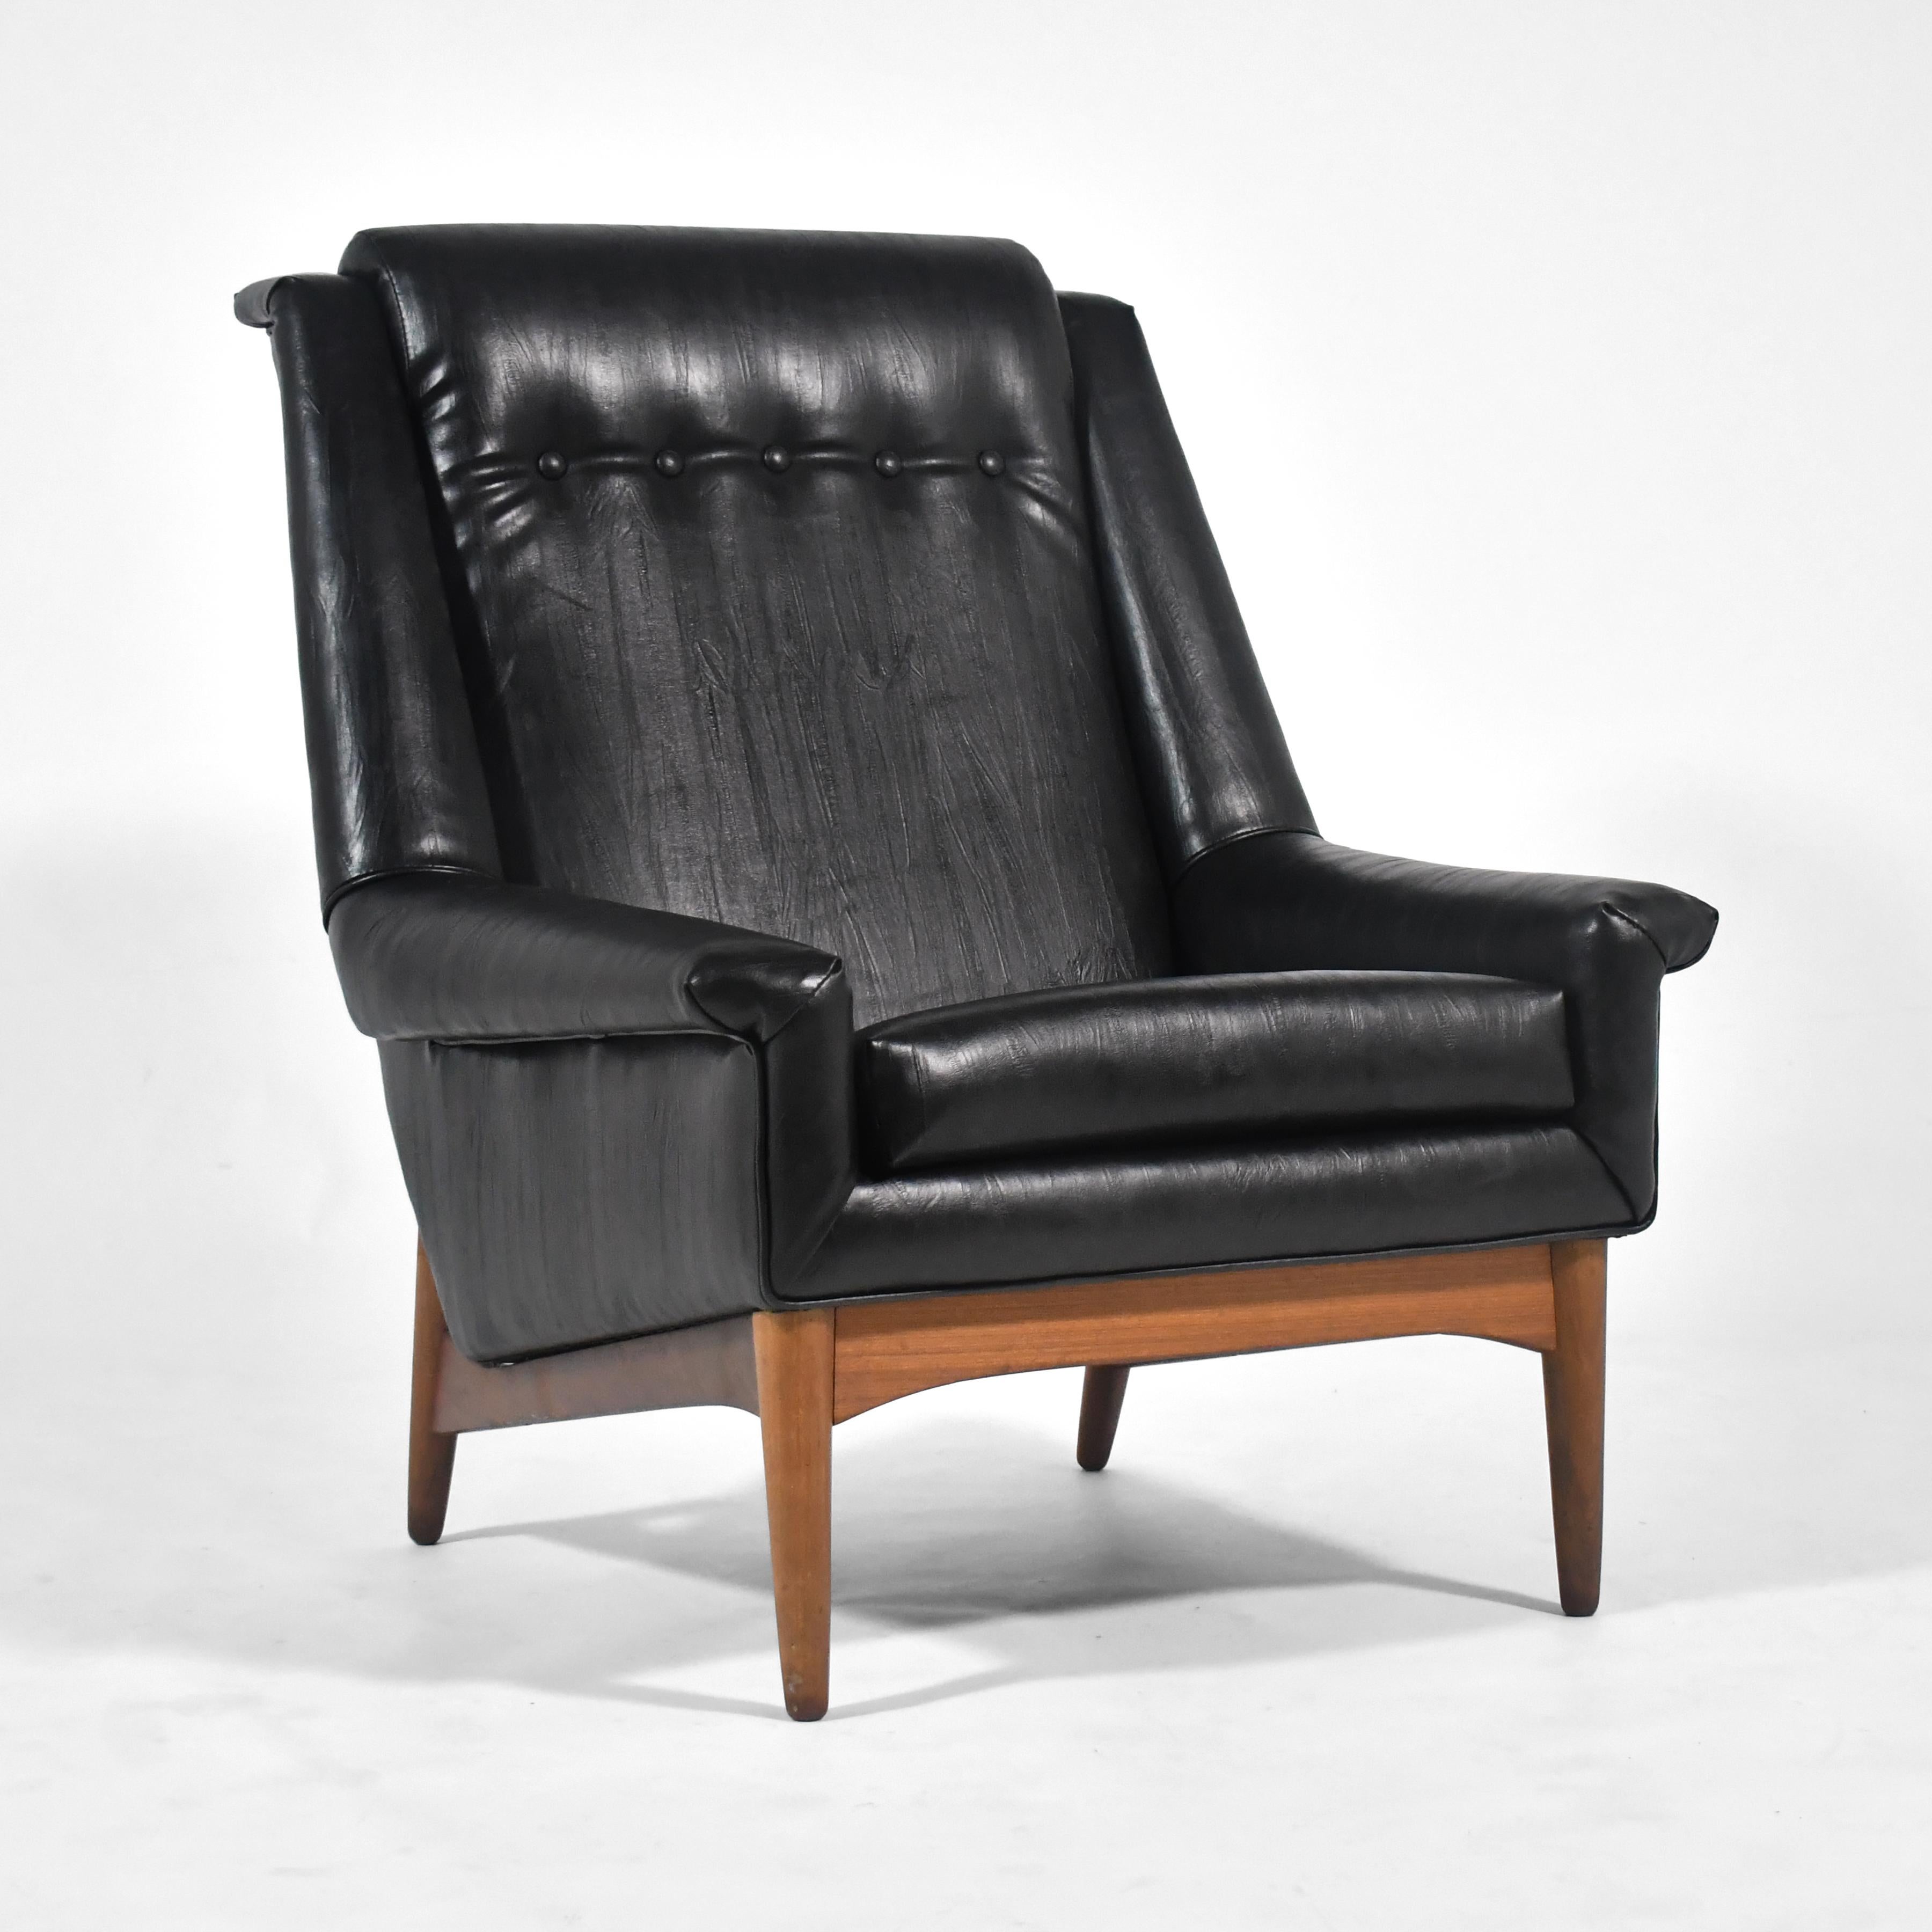 This generous lounge chair designed by Folke Ohlsson for DUX is strikingly handsome and remarkably comfortable.

The walnut base supports the body upholstered in black leatherette.

37